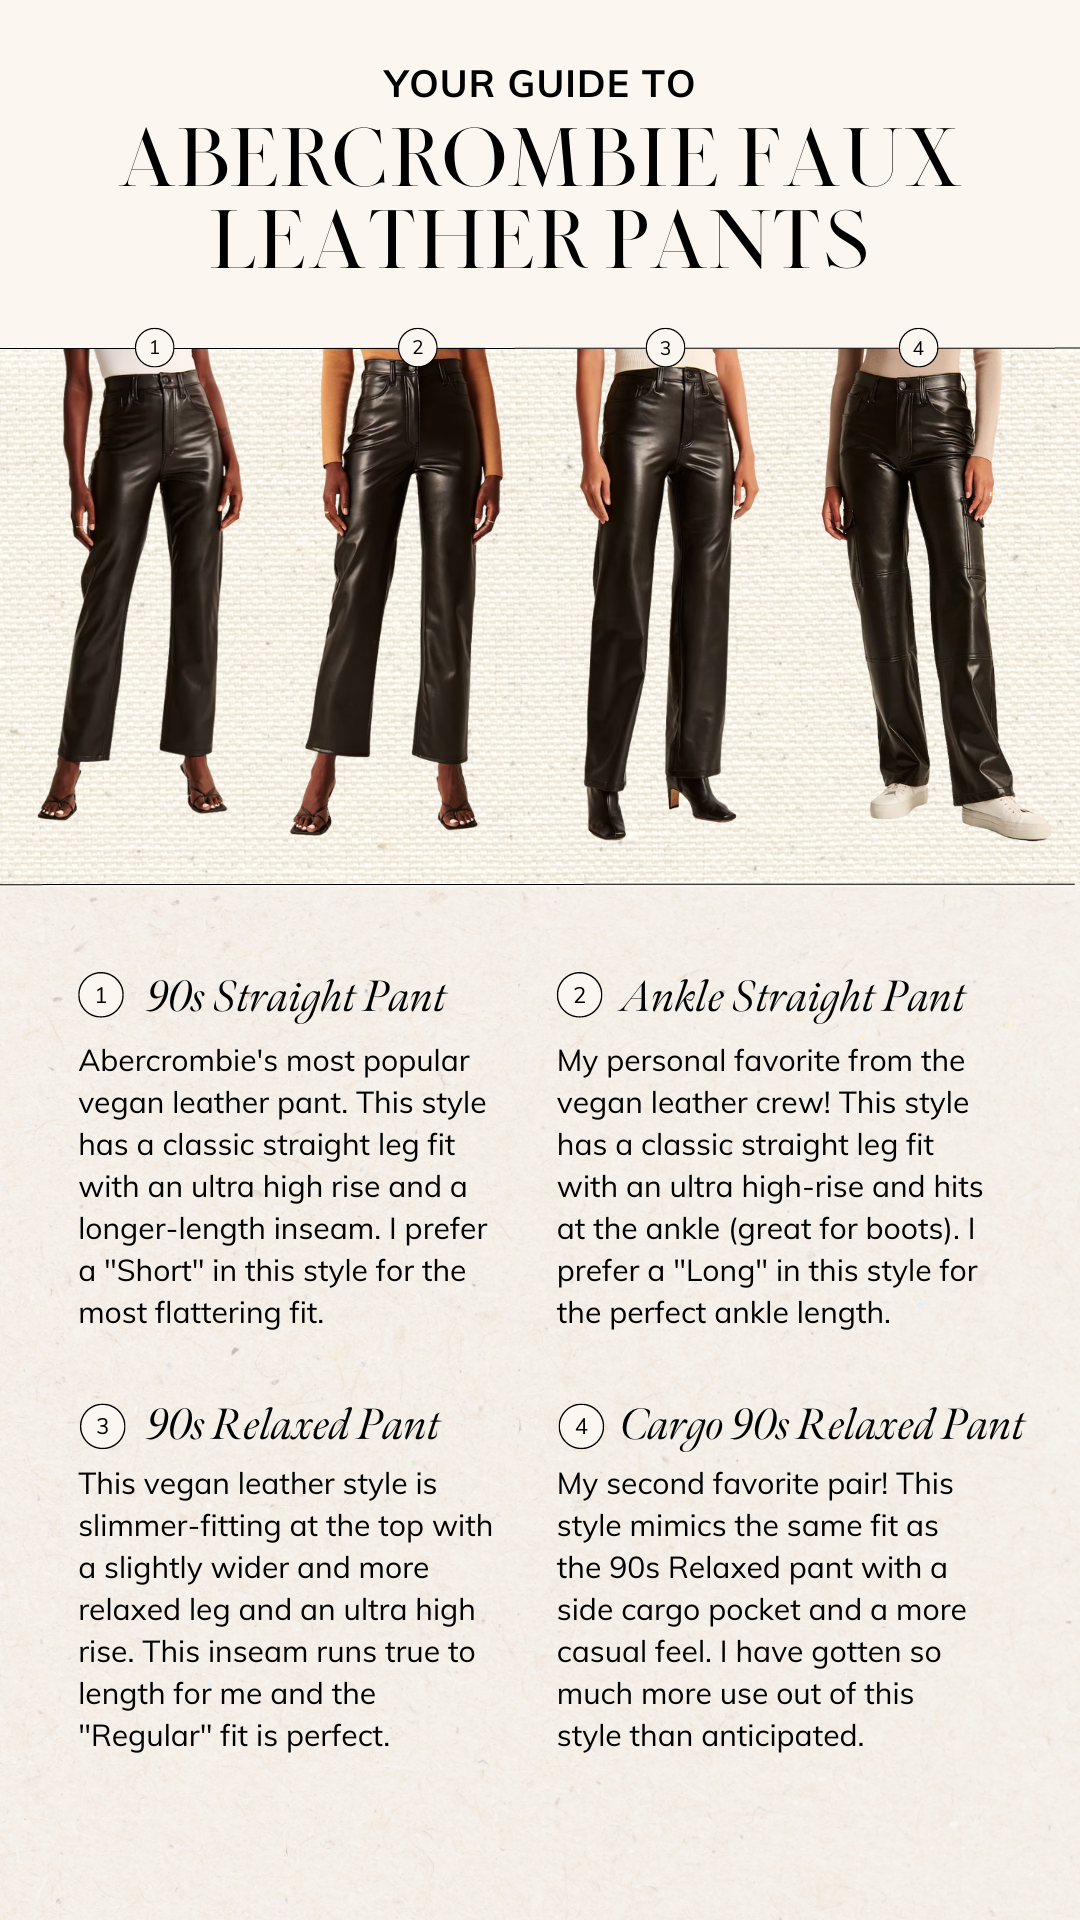 Abercrombie Faux Leather Pants Review